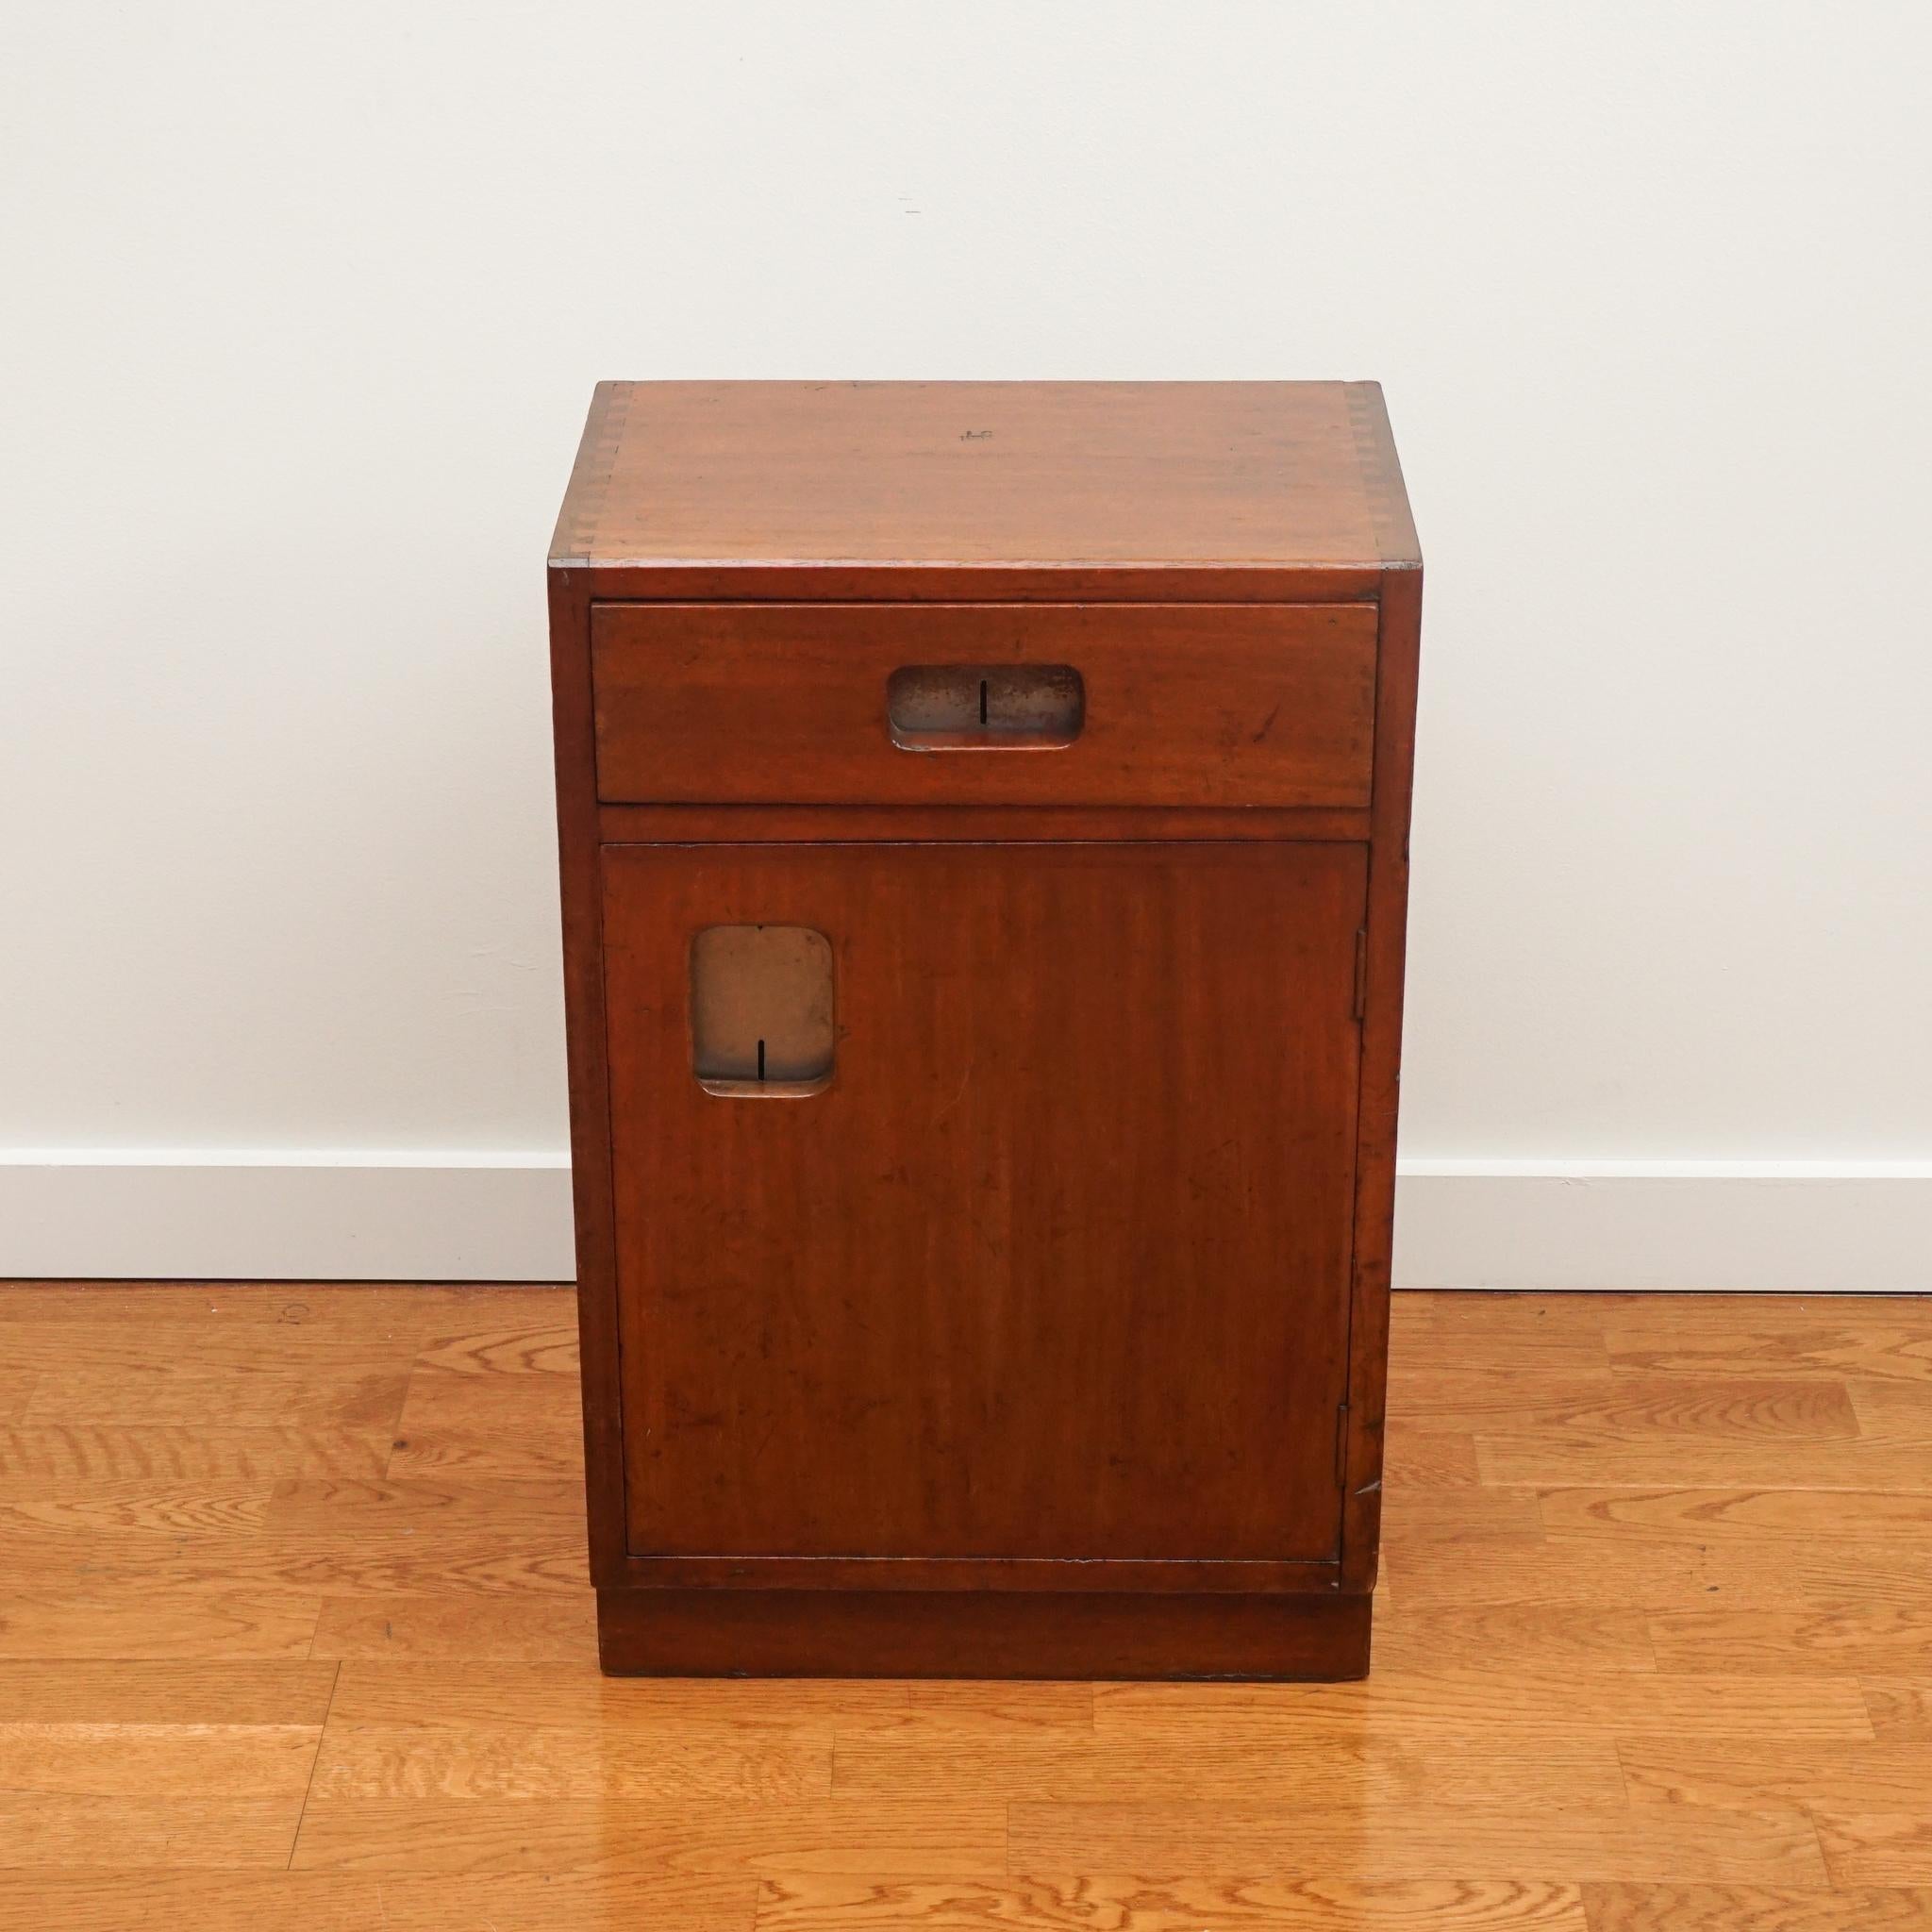 This handsome mahogany cabinet with single door and drawer is as practical today as it was when it was first made in the 1950s. The cabinet has been gently restored to enhance the rich mahogany finish. The brass hardware is original to the piece. A